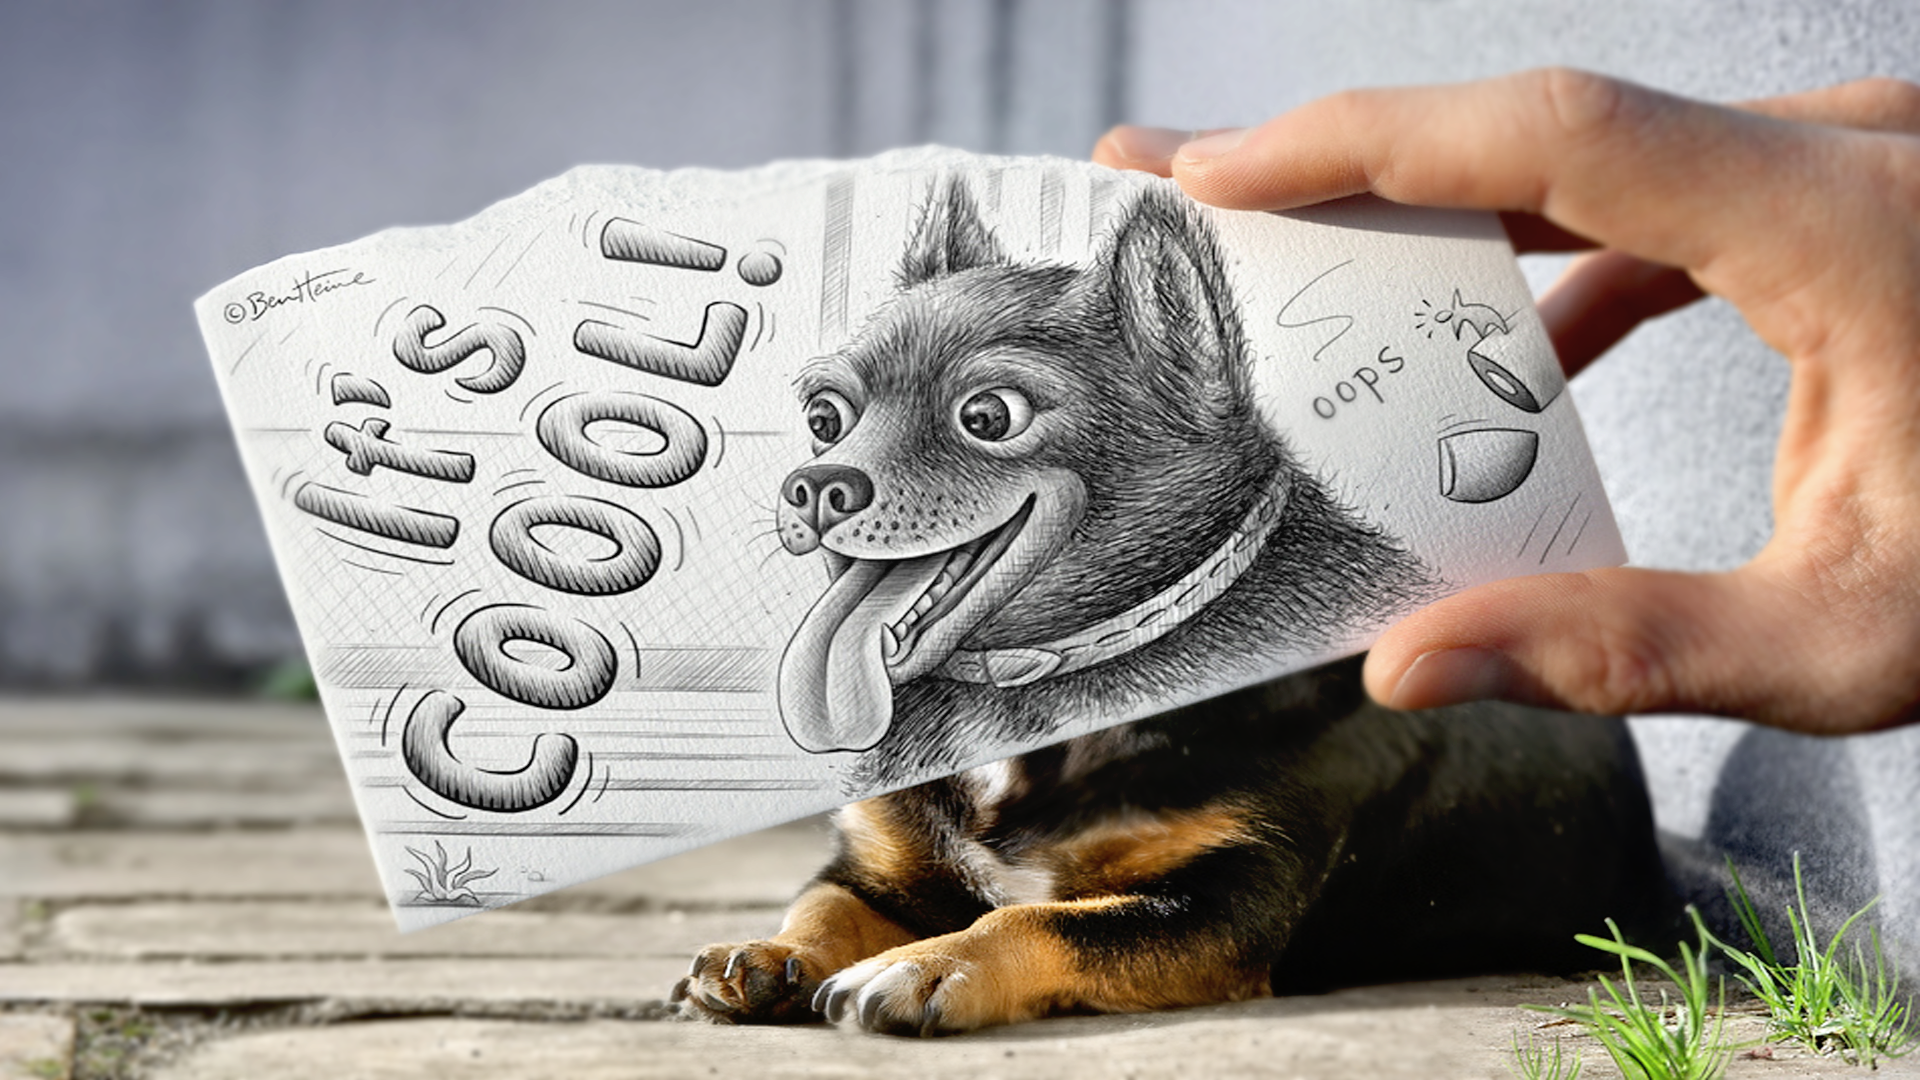 General 1920x1080 artwork dog animals humor drawing pencil drawing tongue out typography hands picture-in-picture mammals picture